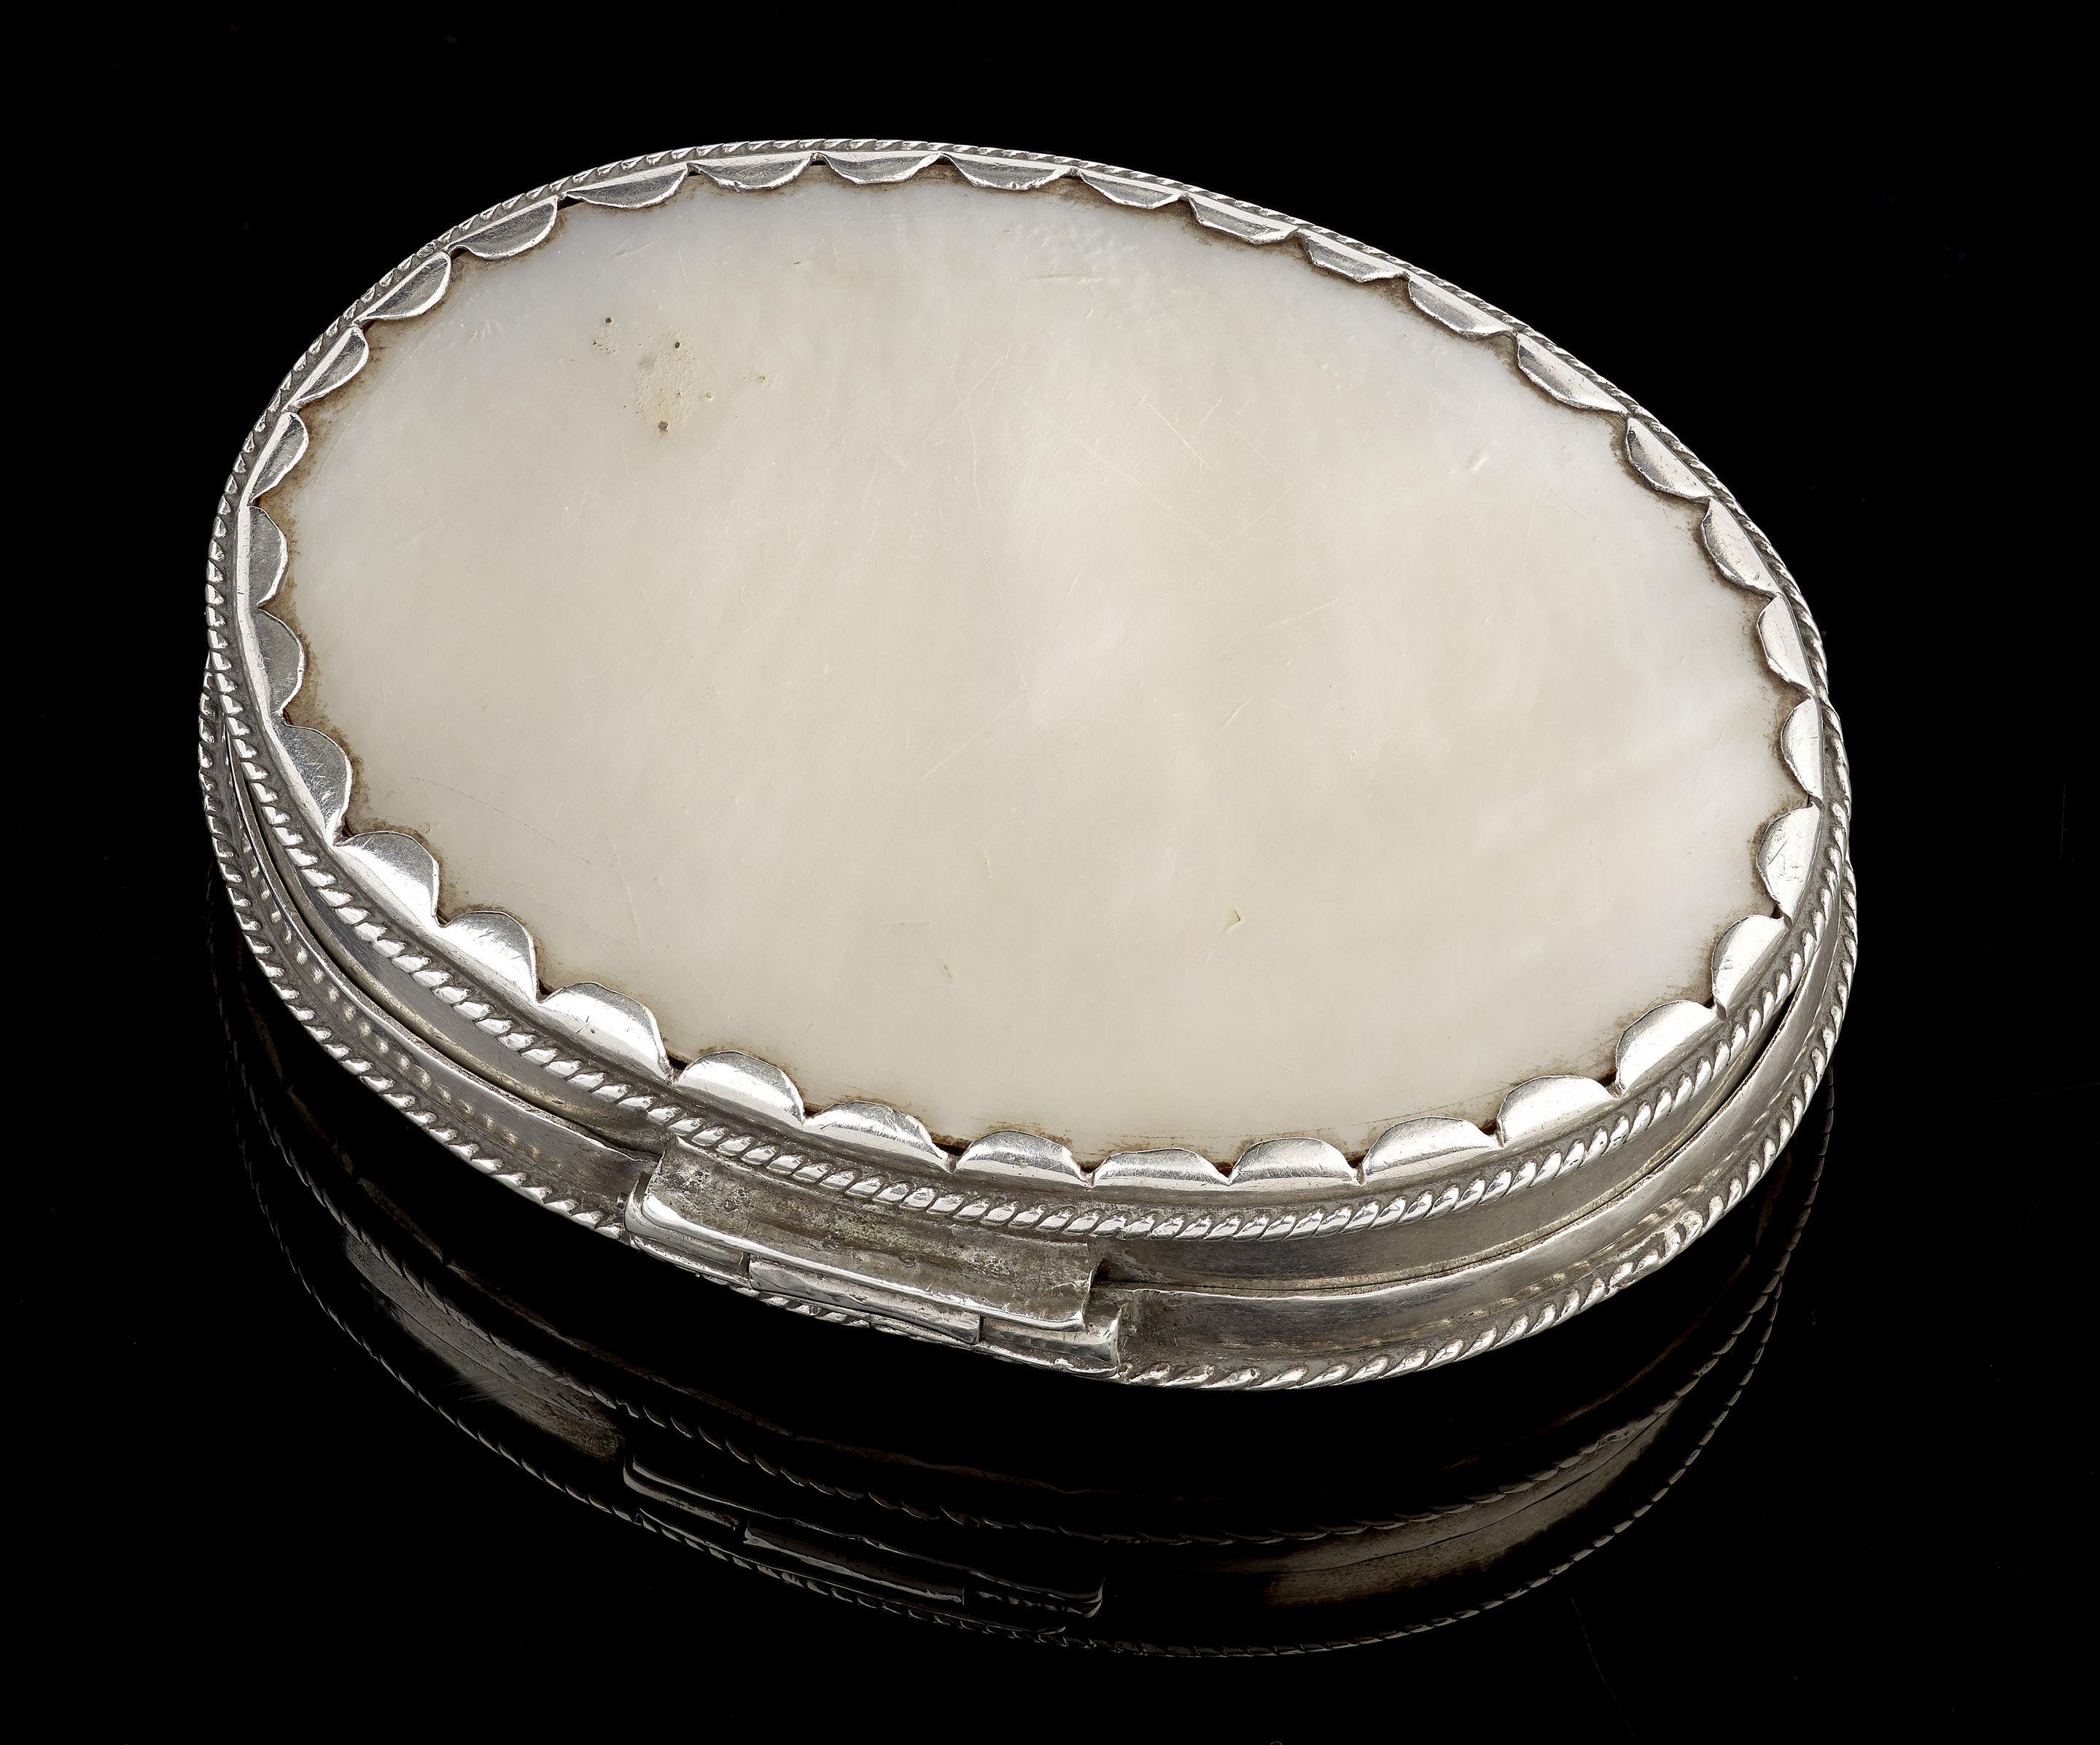 A little carved mother of pearl box with silver mounts, 17th century Spanish Colonial; probably used by a travelling missionary to carry communion bread.